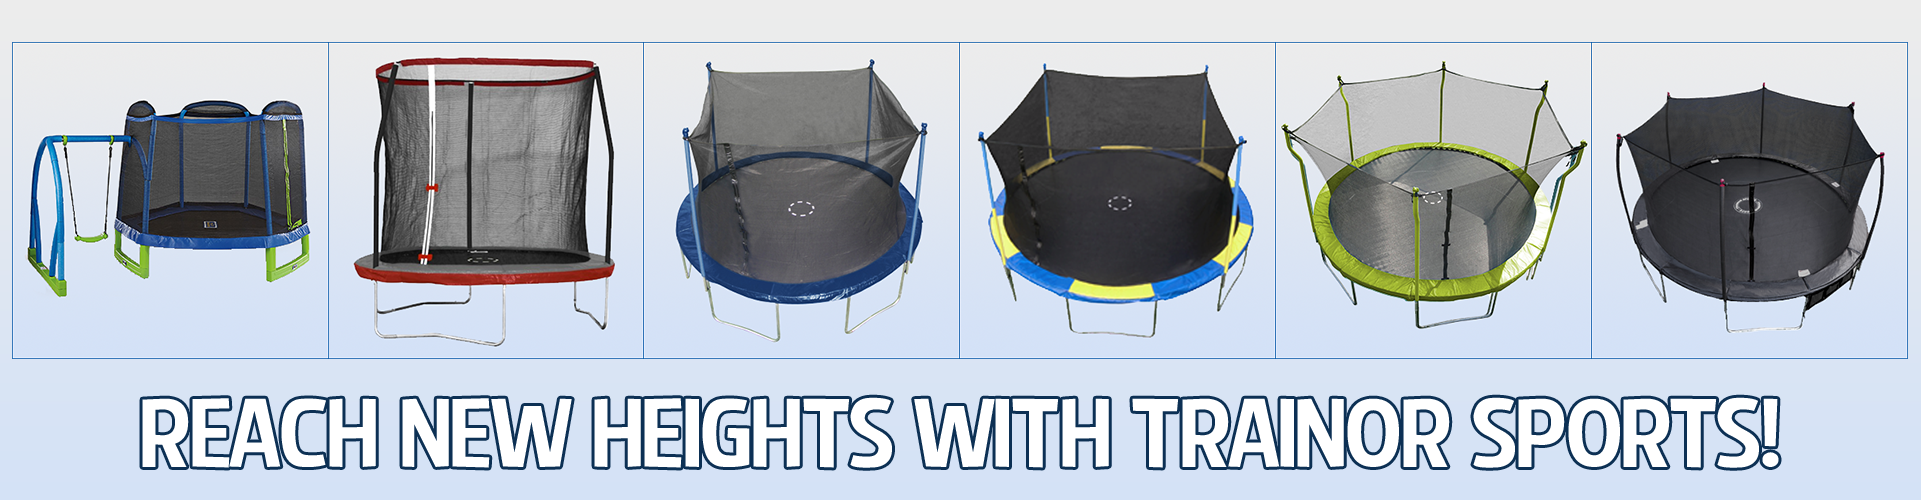 Reach new heights with Trainor Sports.